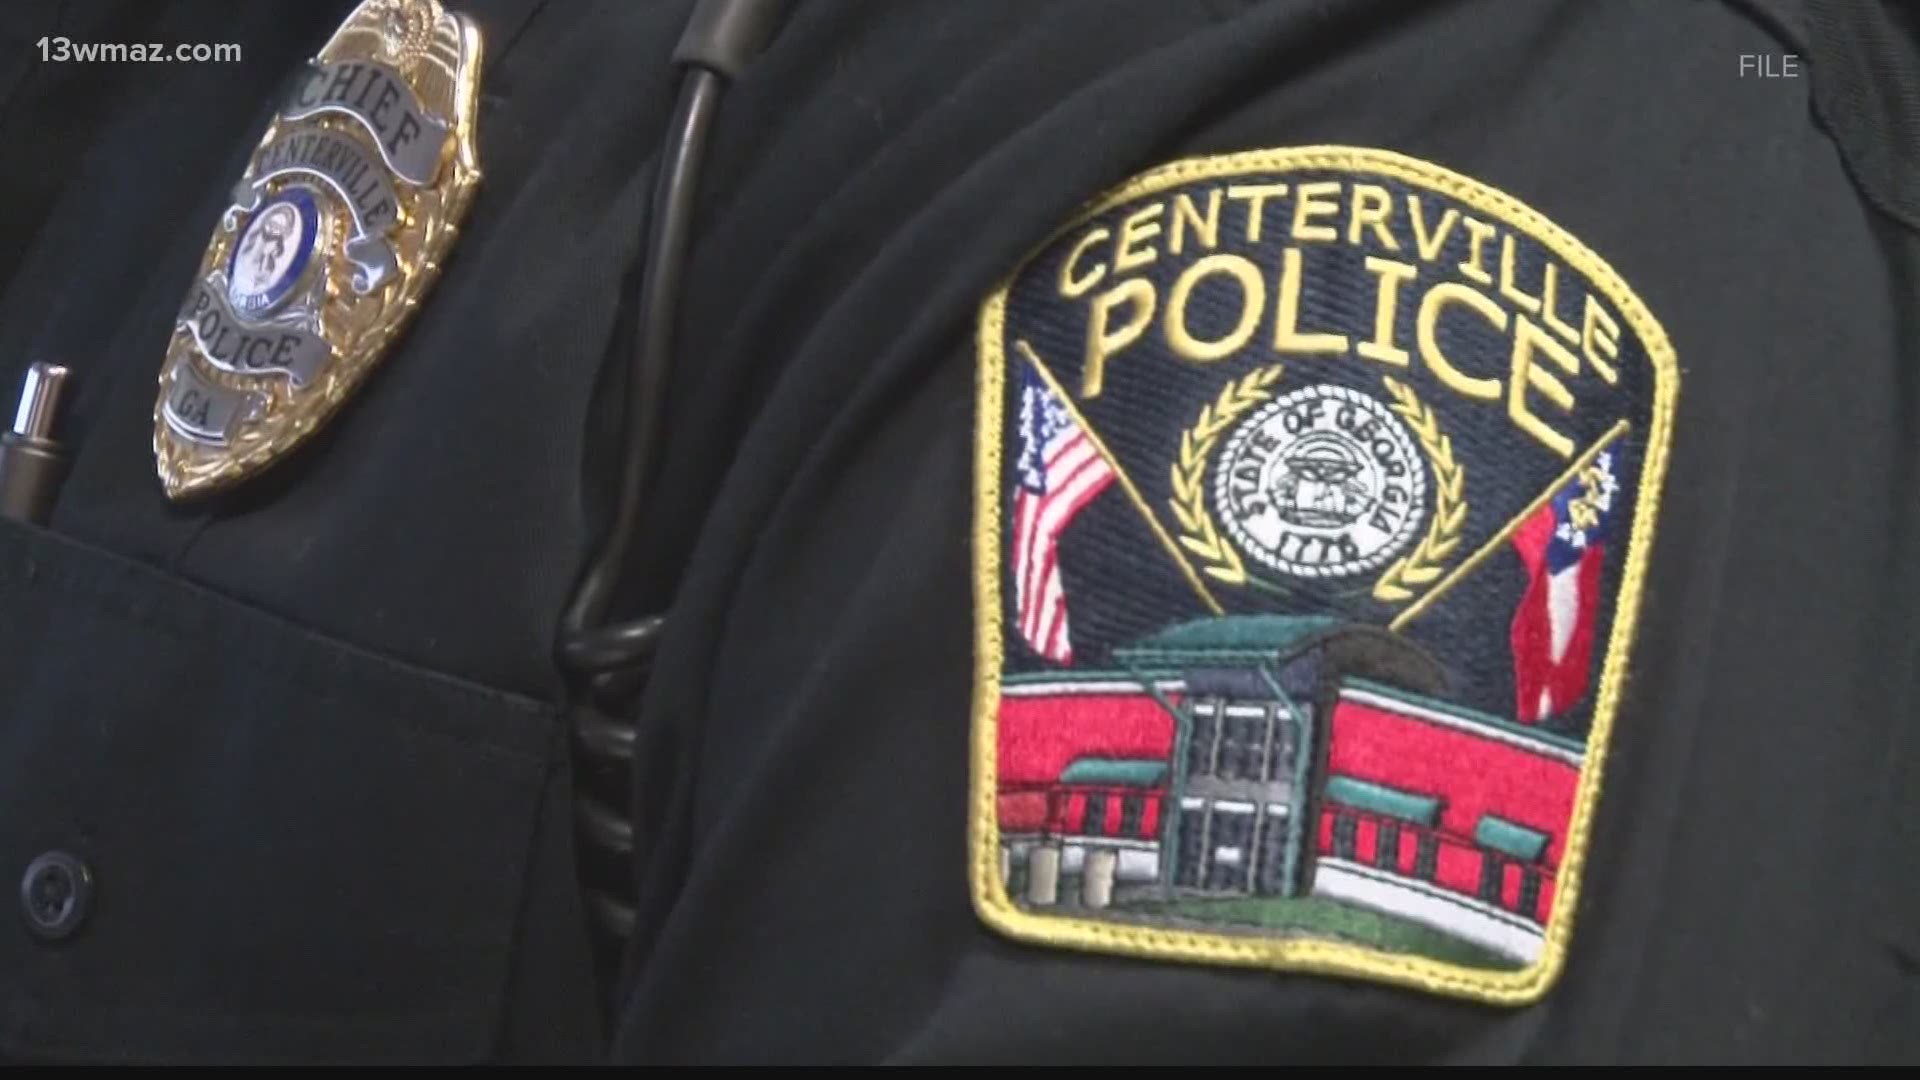 The Houston County Sheriff's Office is now in charge of running the Centerville Police Department on a temporary basis.